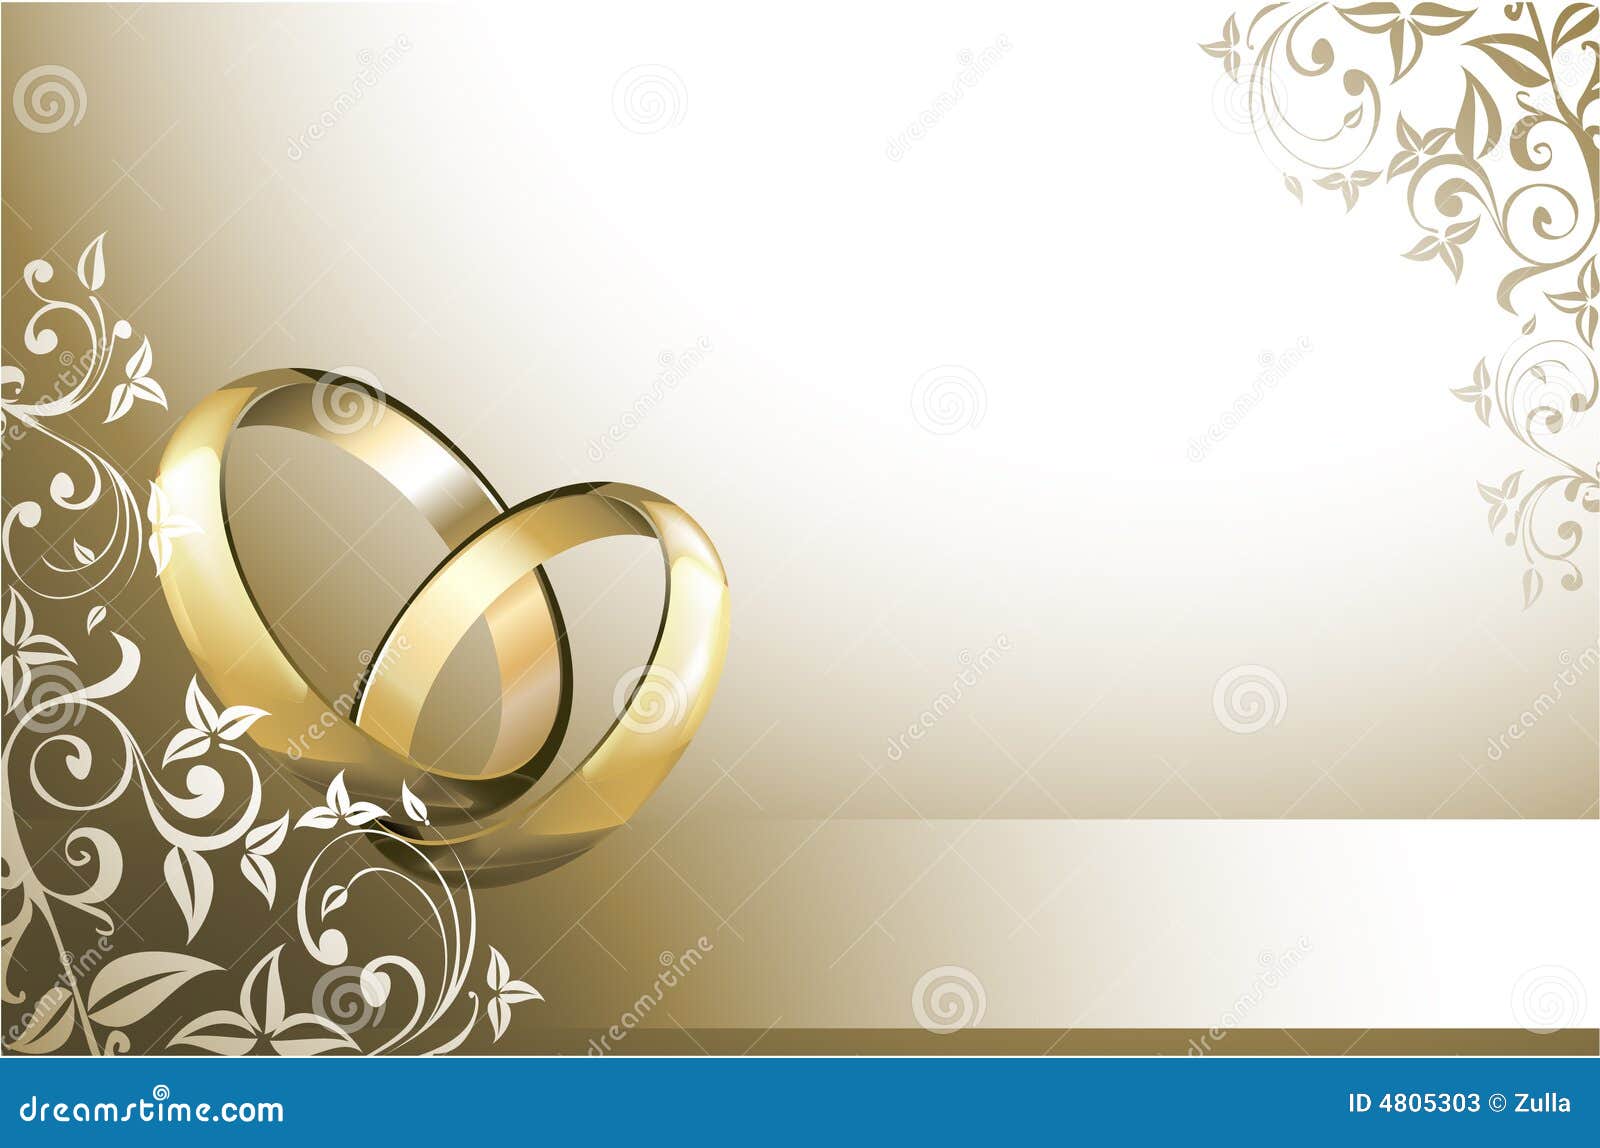 free clipart for wedding card - photo #25